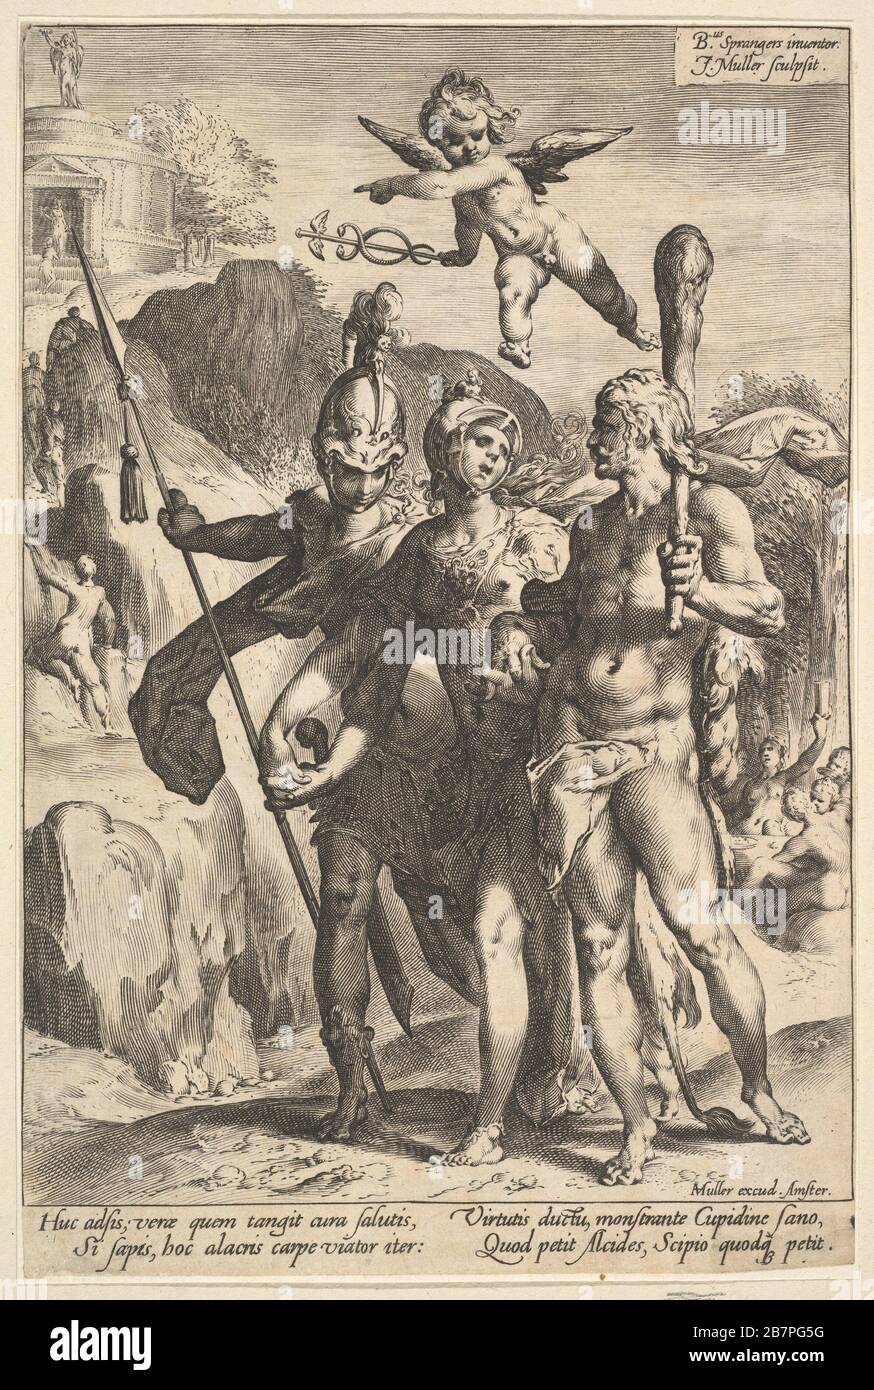 Hercules Being Shown the Mountainous Road to the Temple of Immortal Fame in the Company of Minerva and Mars, ca. 1591. After Bartholomeus Spranger Stock Photo